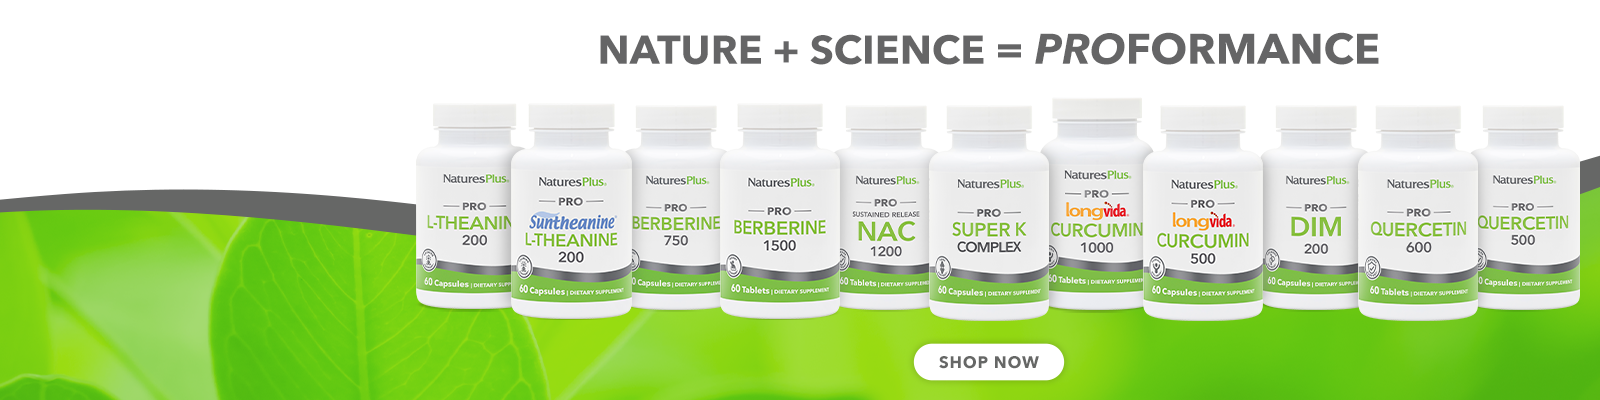 banner displaying full line of naturesplus PRO products. Text on top of products displays - Nature + science = PROFORMANCE